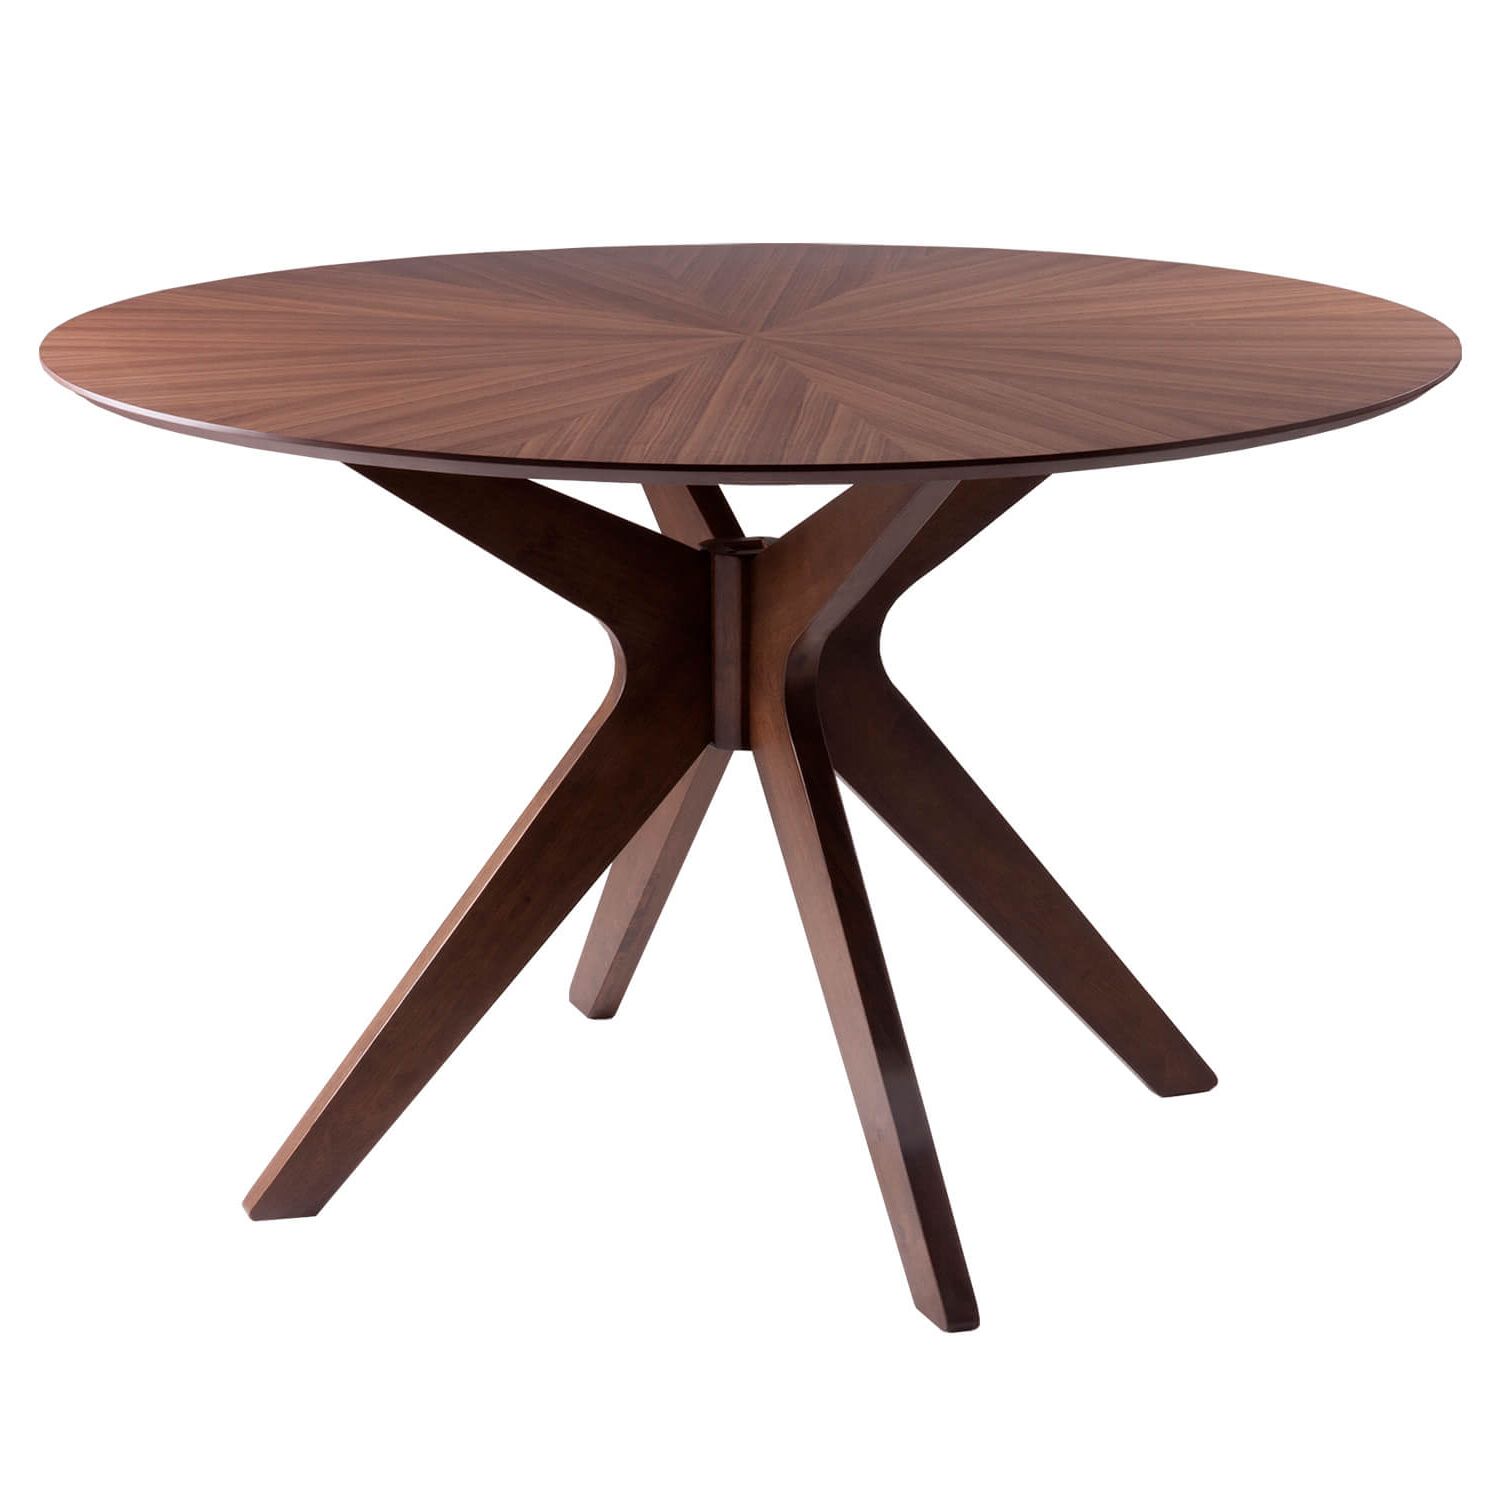 Widely Used Carmel Table In Walnut 120cm – Restylit Shop – Dreamy Interiors Within Walnut Outdoor Tables (View 9 of 15)